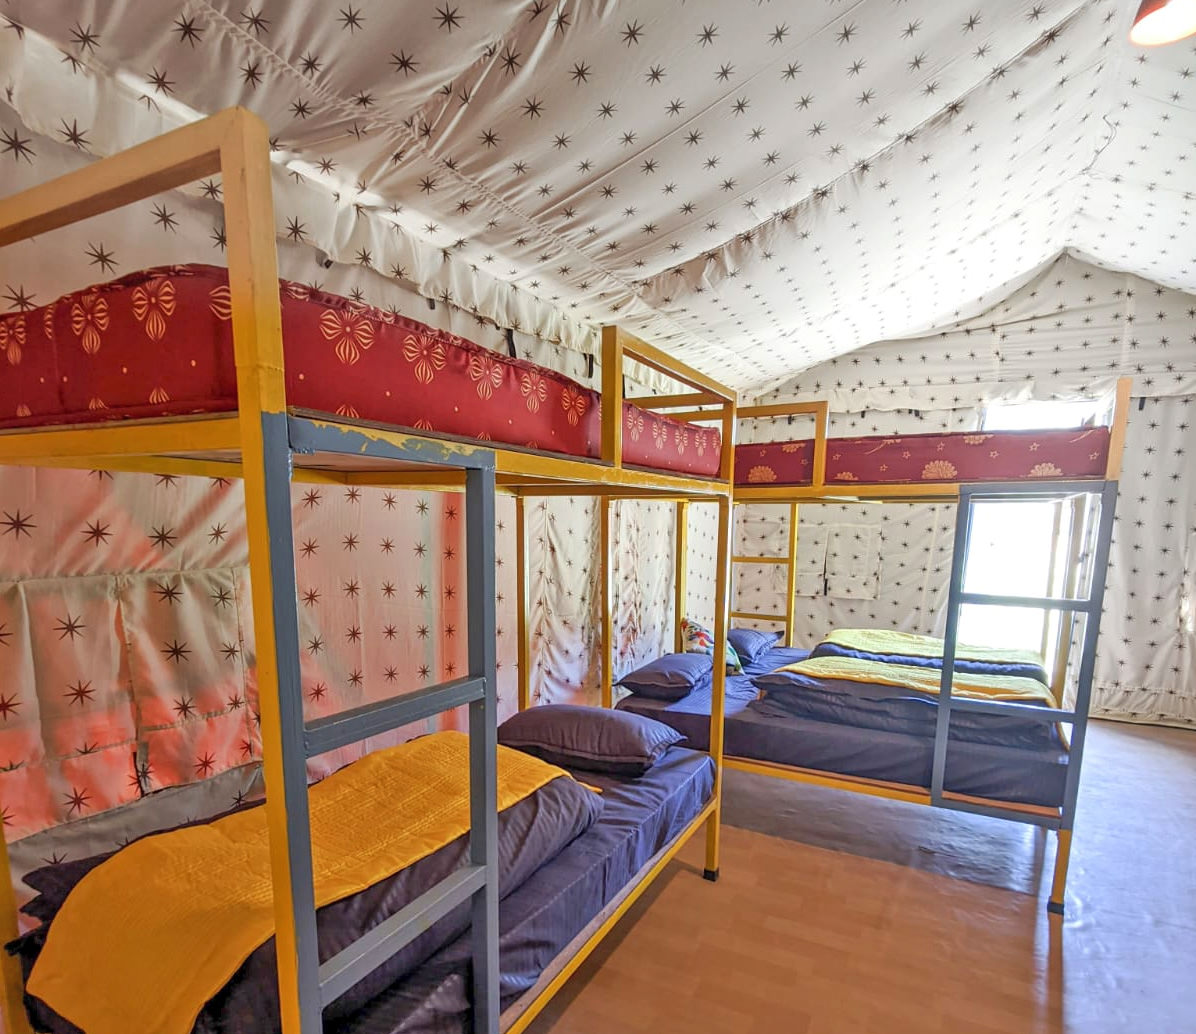 Rishikesh Riverside Camping - Best Bunk Bed Stay Photos